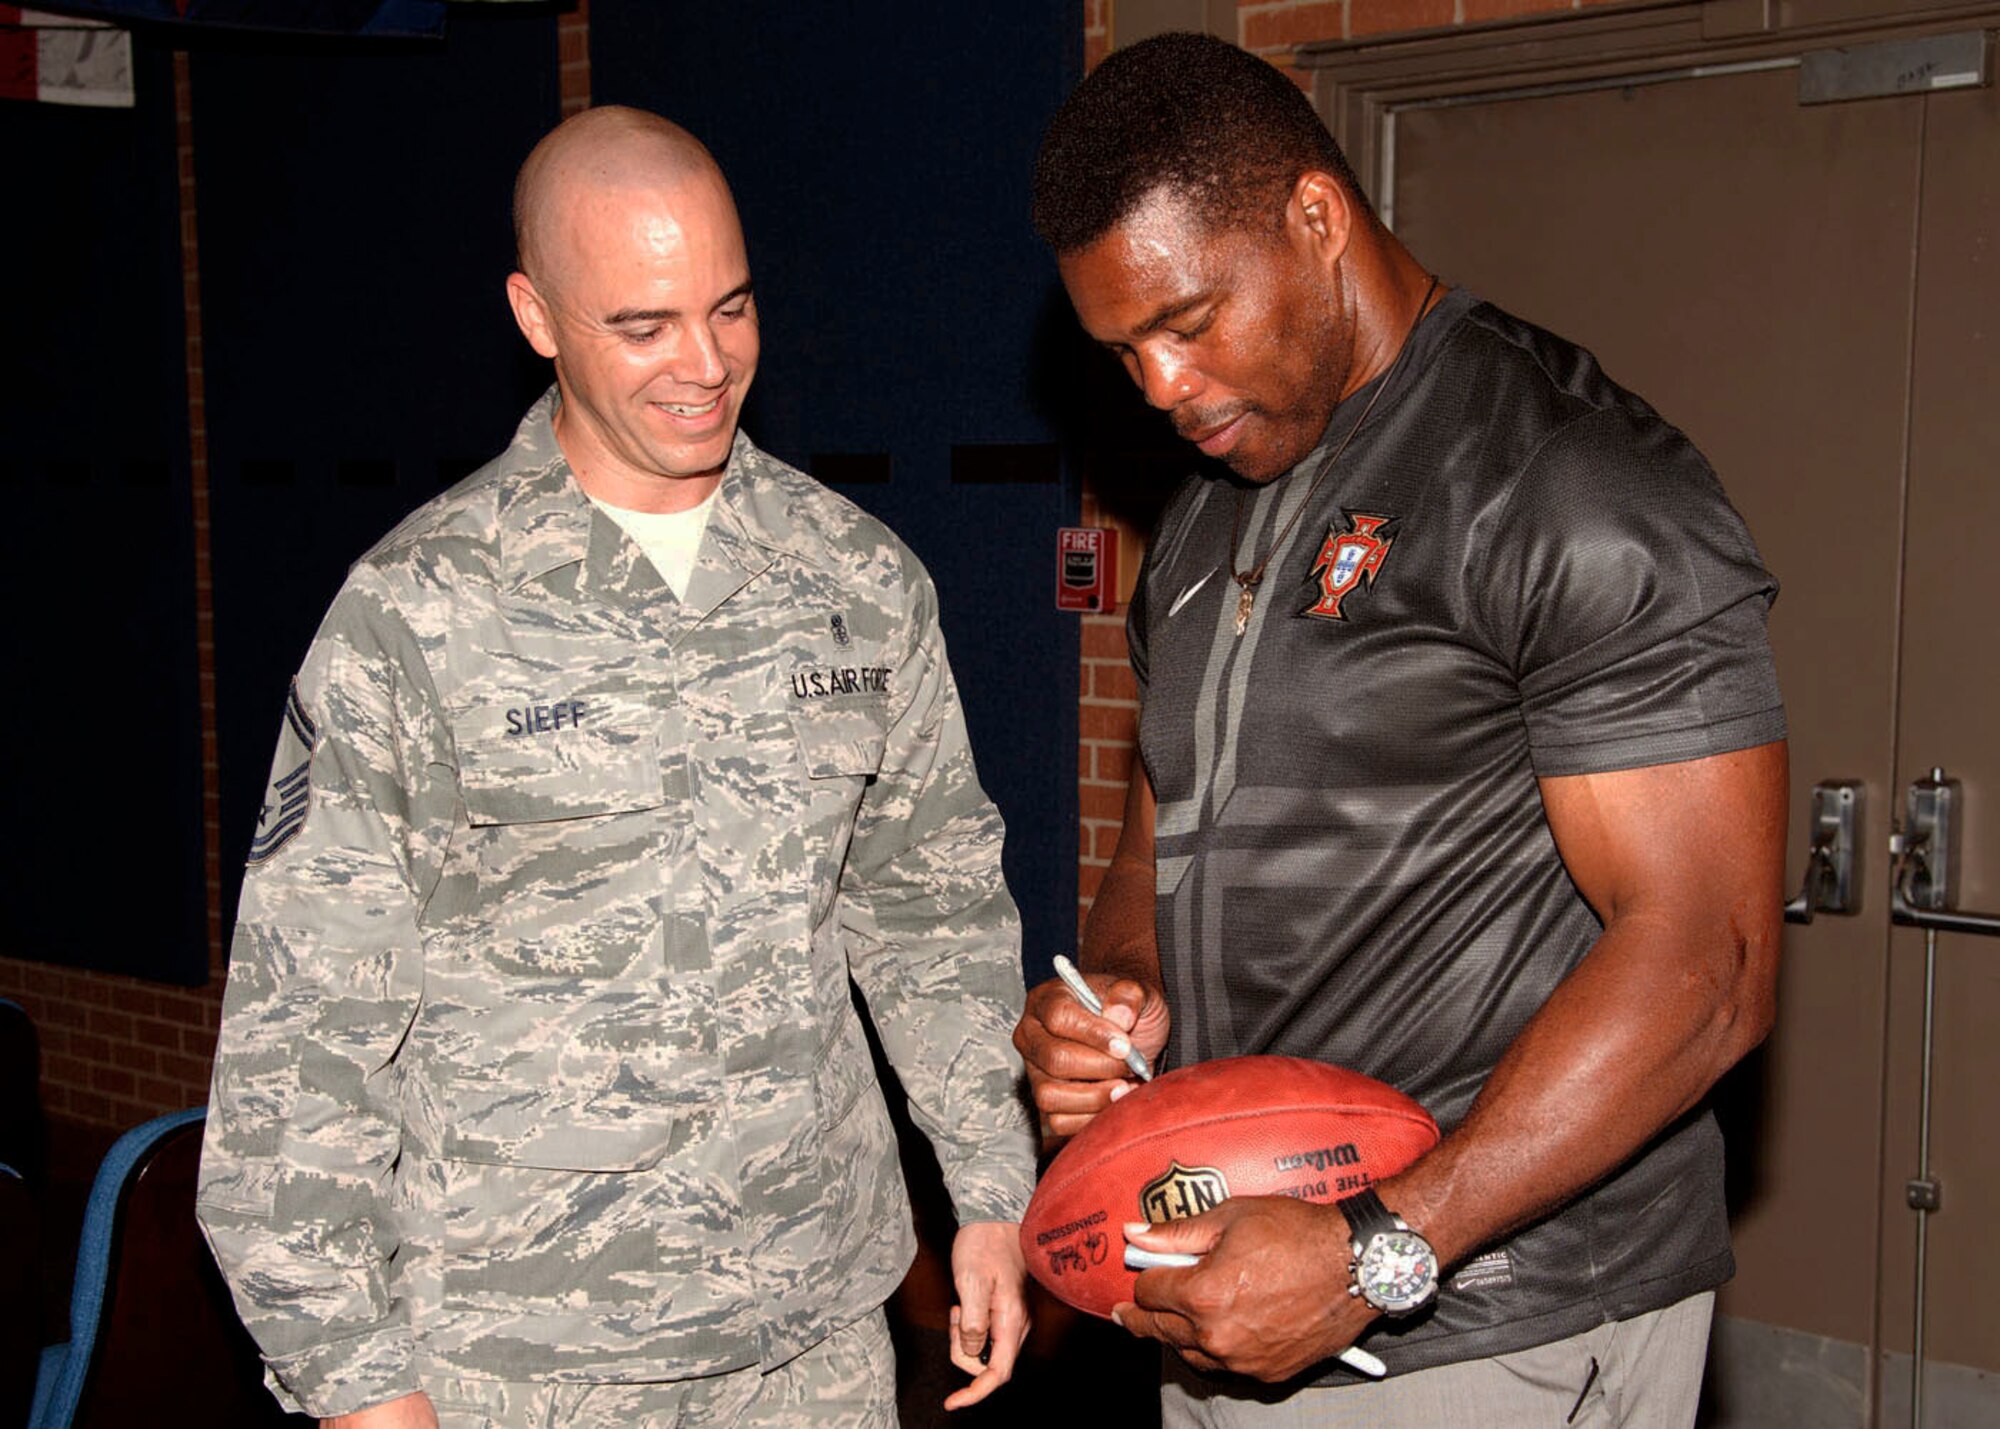 Herschel Walker signs an autograph for Senior Master Sgt. Oren Sieff, 59th Surgical Operations Squadron Superintendant, Oct. 23, 2013 in the Wilford Hall Ambulatory Surgical Center auditorium, Joint Base San Antonio-Lackland, Texas. (U.S. Air Force photo/Senior Airman Chelsea Browning)